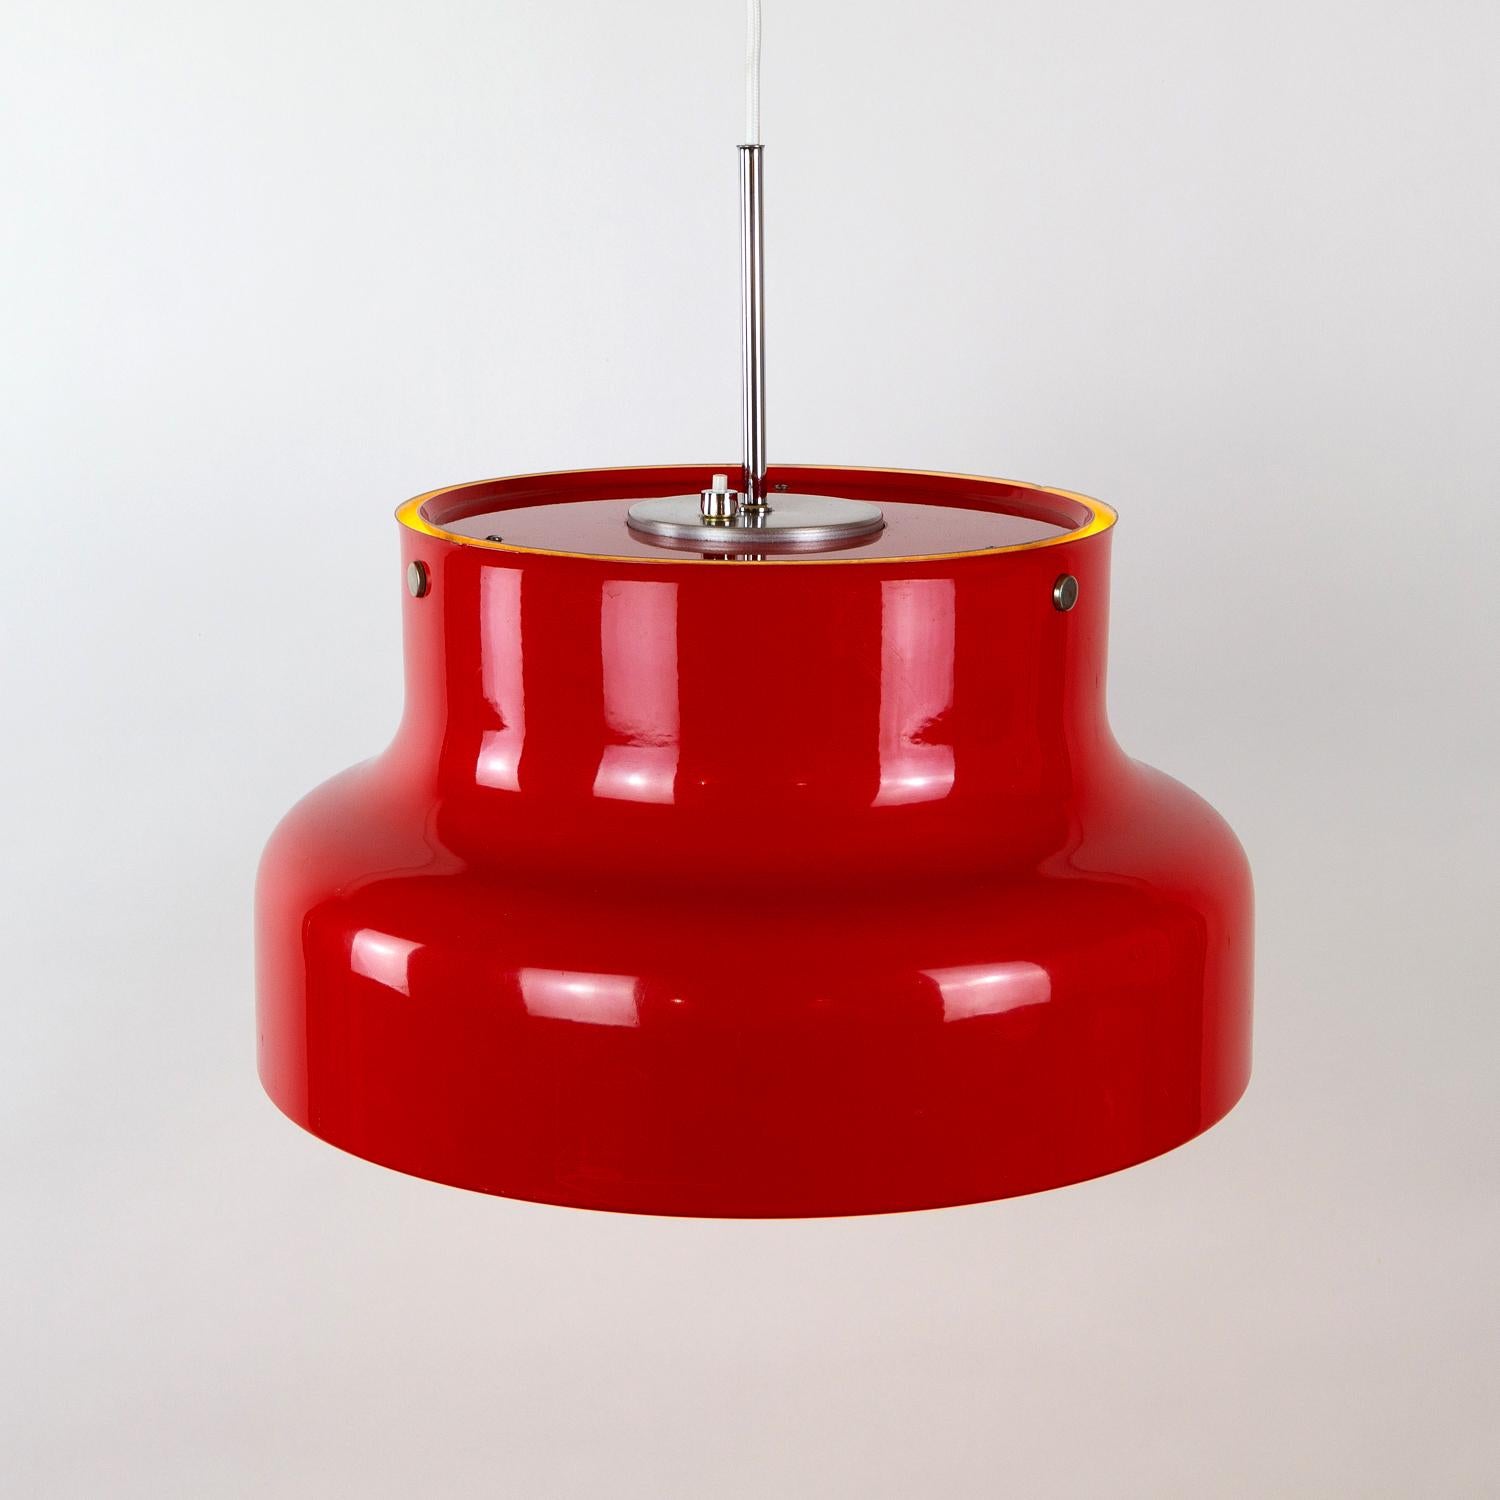 Mid-Century Modern Red Bumling Pendant by Anders Pehrson for Ateljé Lyktan, Sweden, 1960s For Sale